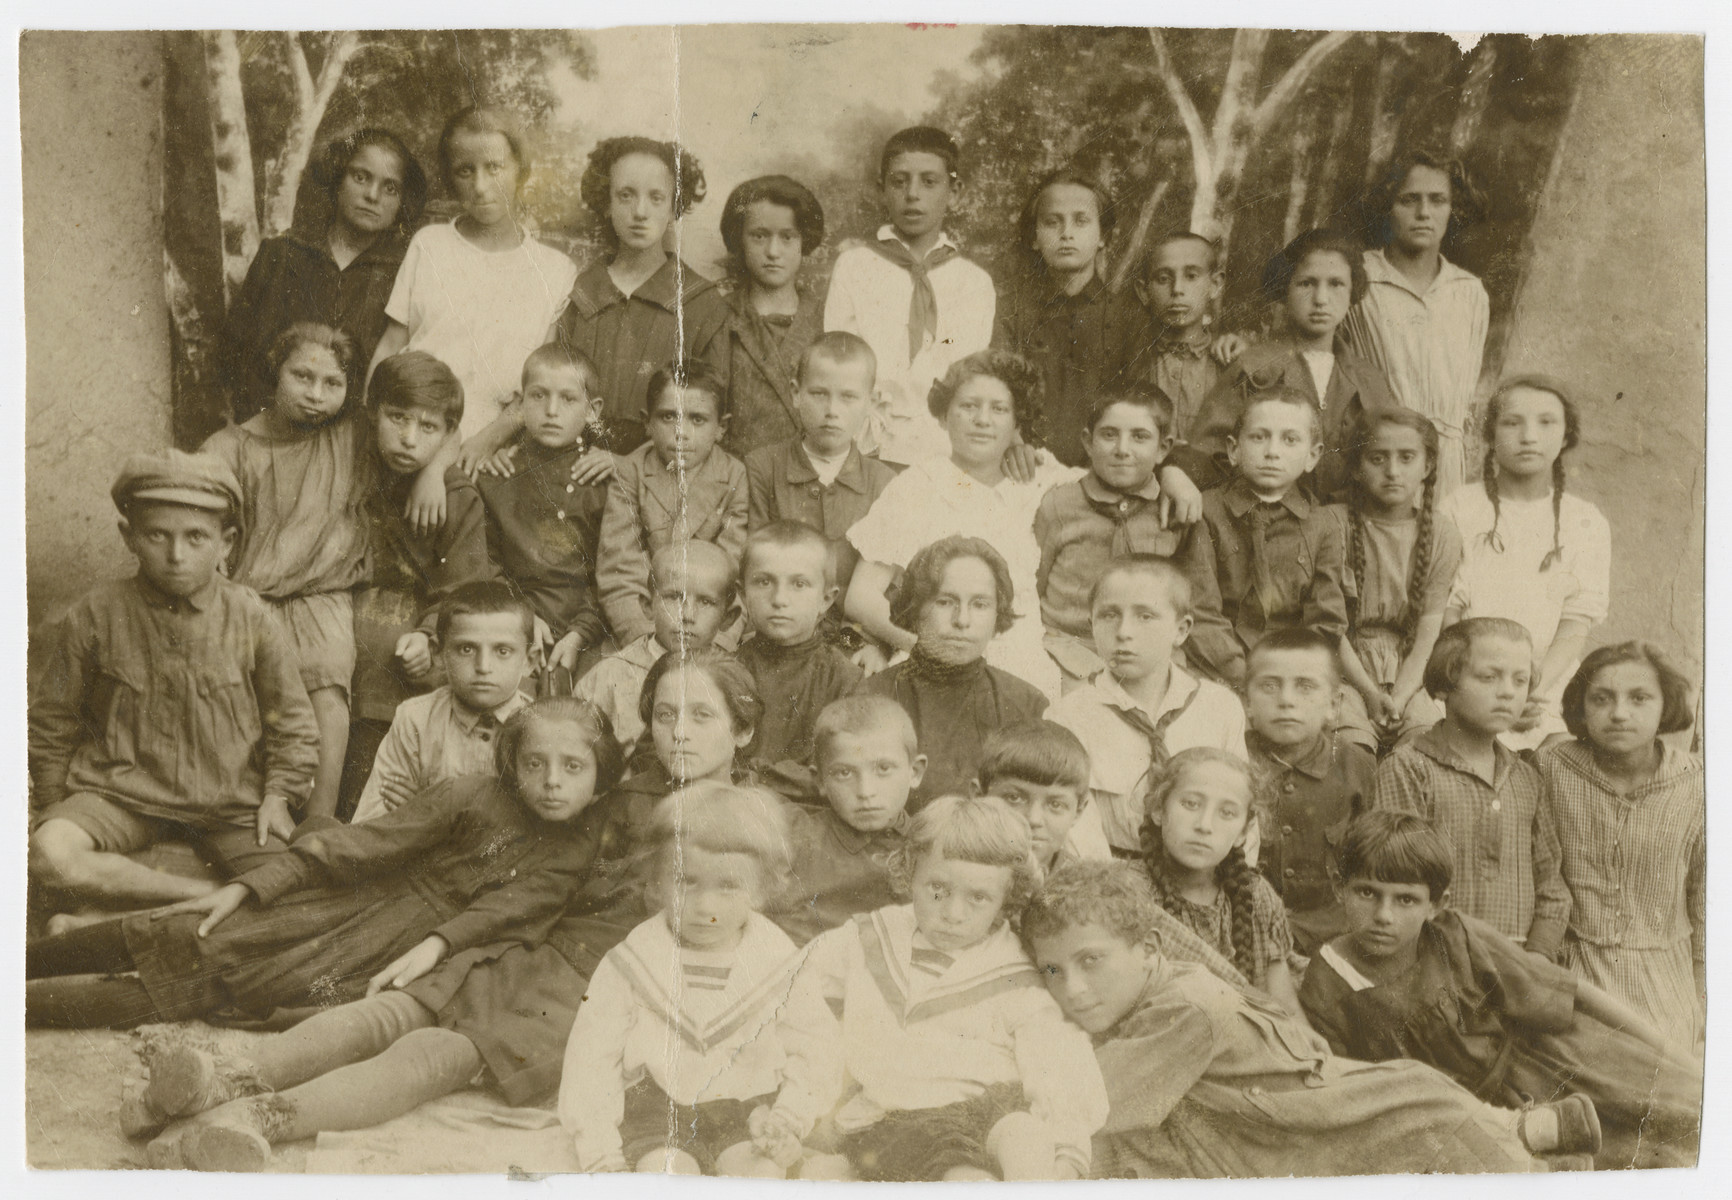 Group portrait of Jewish youth from Orinin, USSR.

The original caption reads: No survivors.